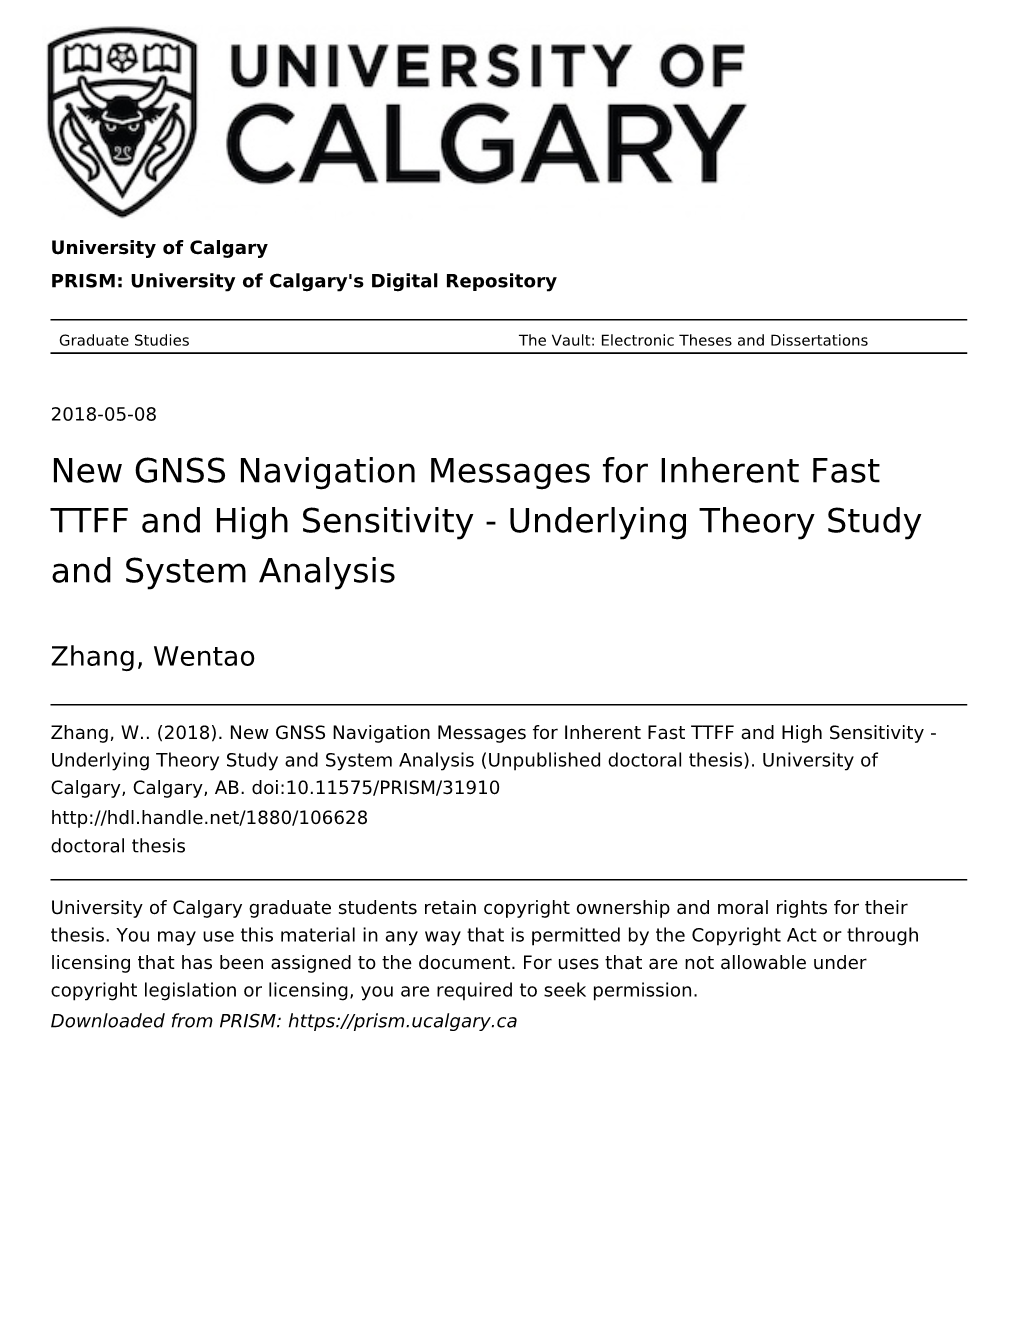 New GNSS Navigation Messages for Inherent Fast TTFF and High Sensitivity - Underlying Theory Study and System Analysis